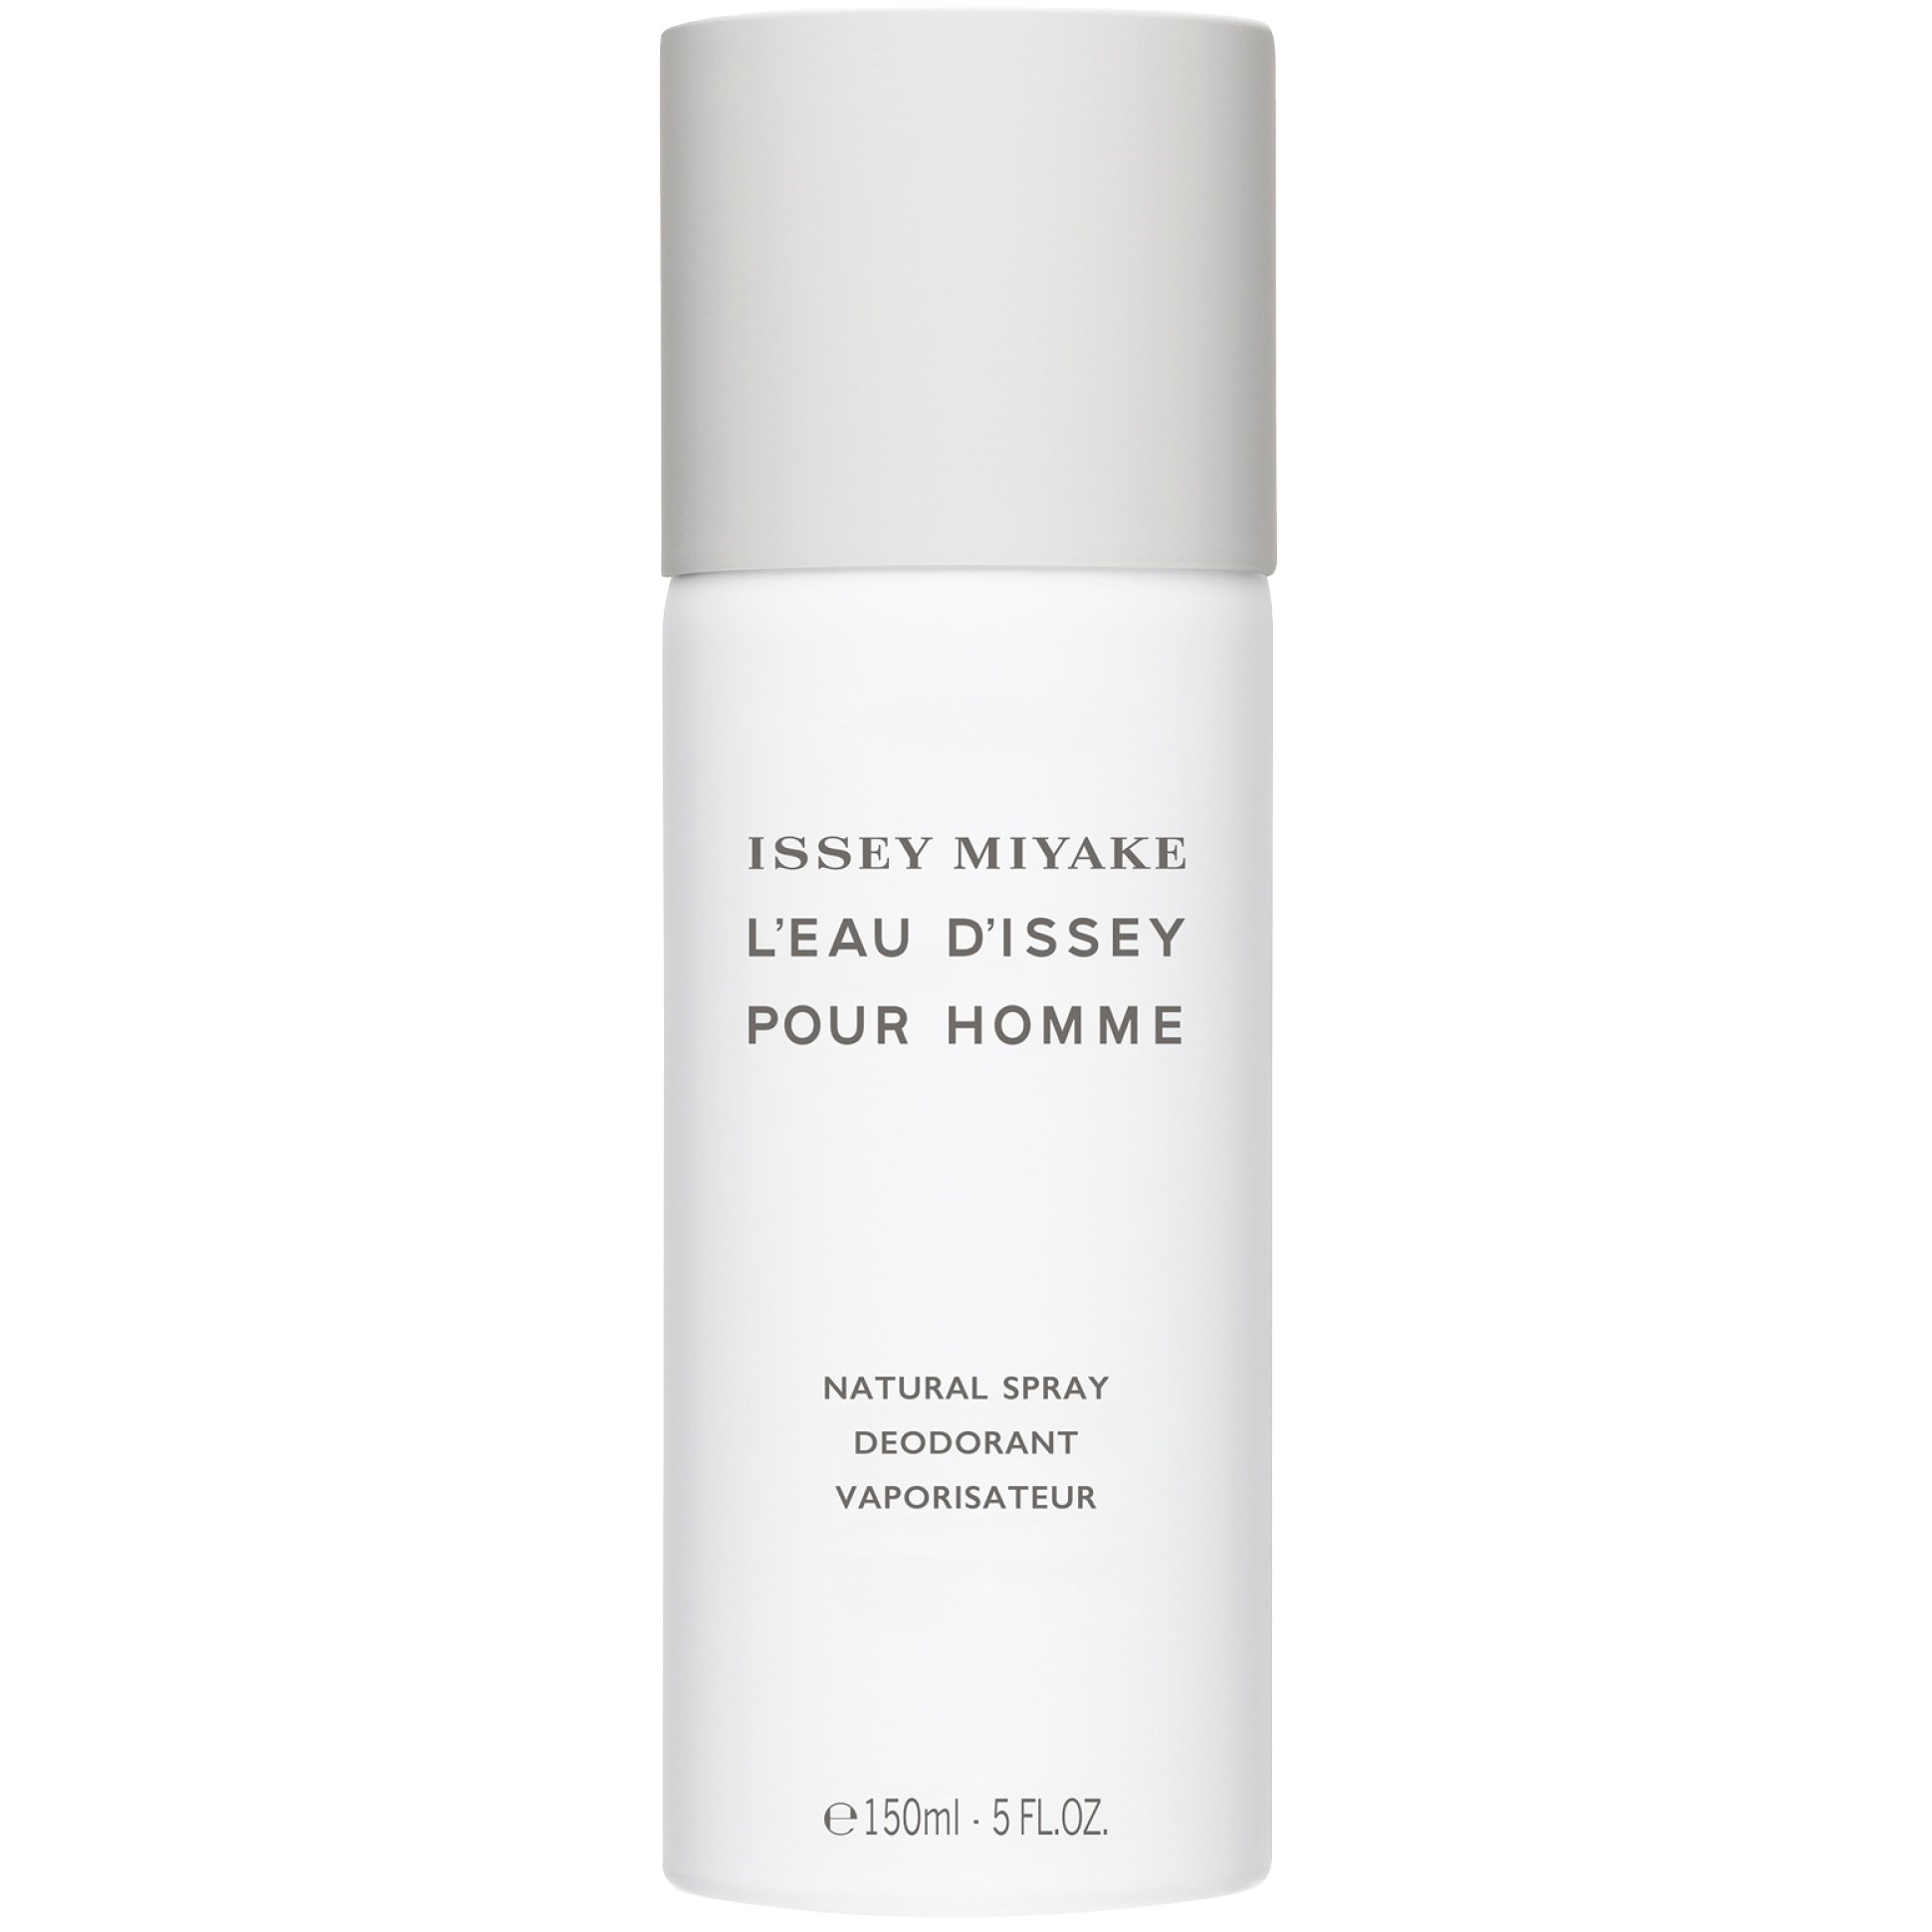 Issey Miyake L’Eau d’Issey Pour Homme Deodorant Spray 150 ml